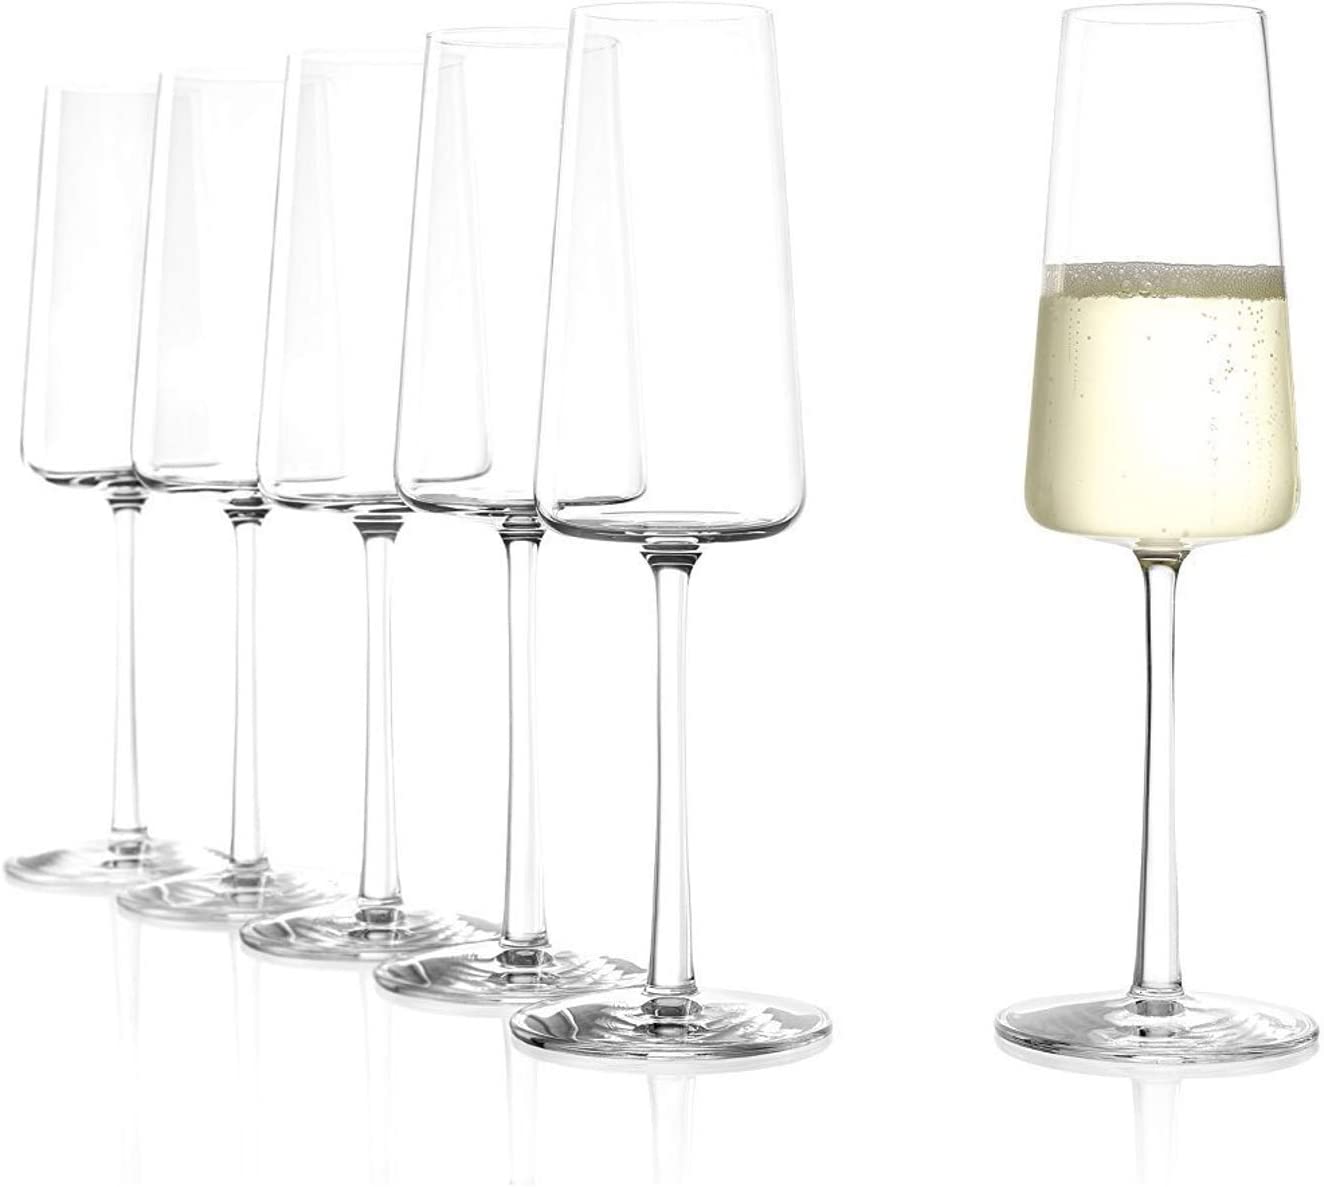 Stölzle lausitz power champagne floods 238 ml set of 6 with calibration mark 0.1 l Ideal for catering and hotels